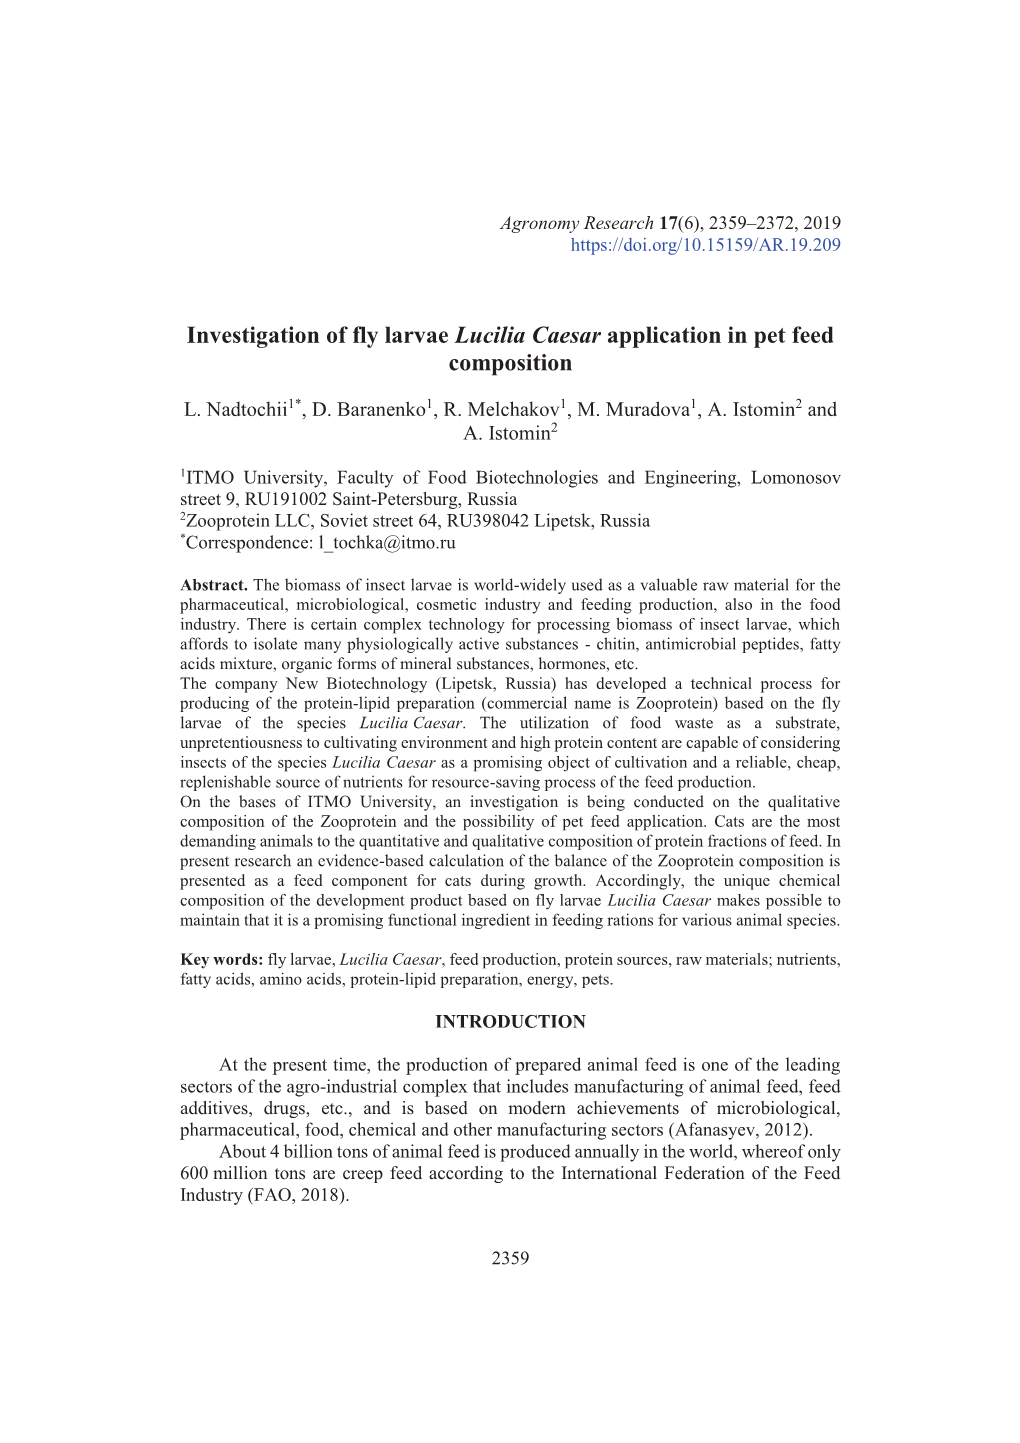 Investigation of Fly Larvae Lucilia Caesar Application in Pet Feed Composition